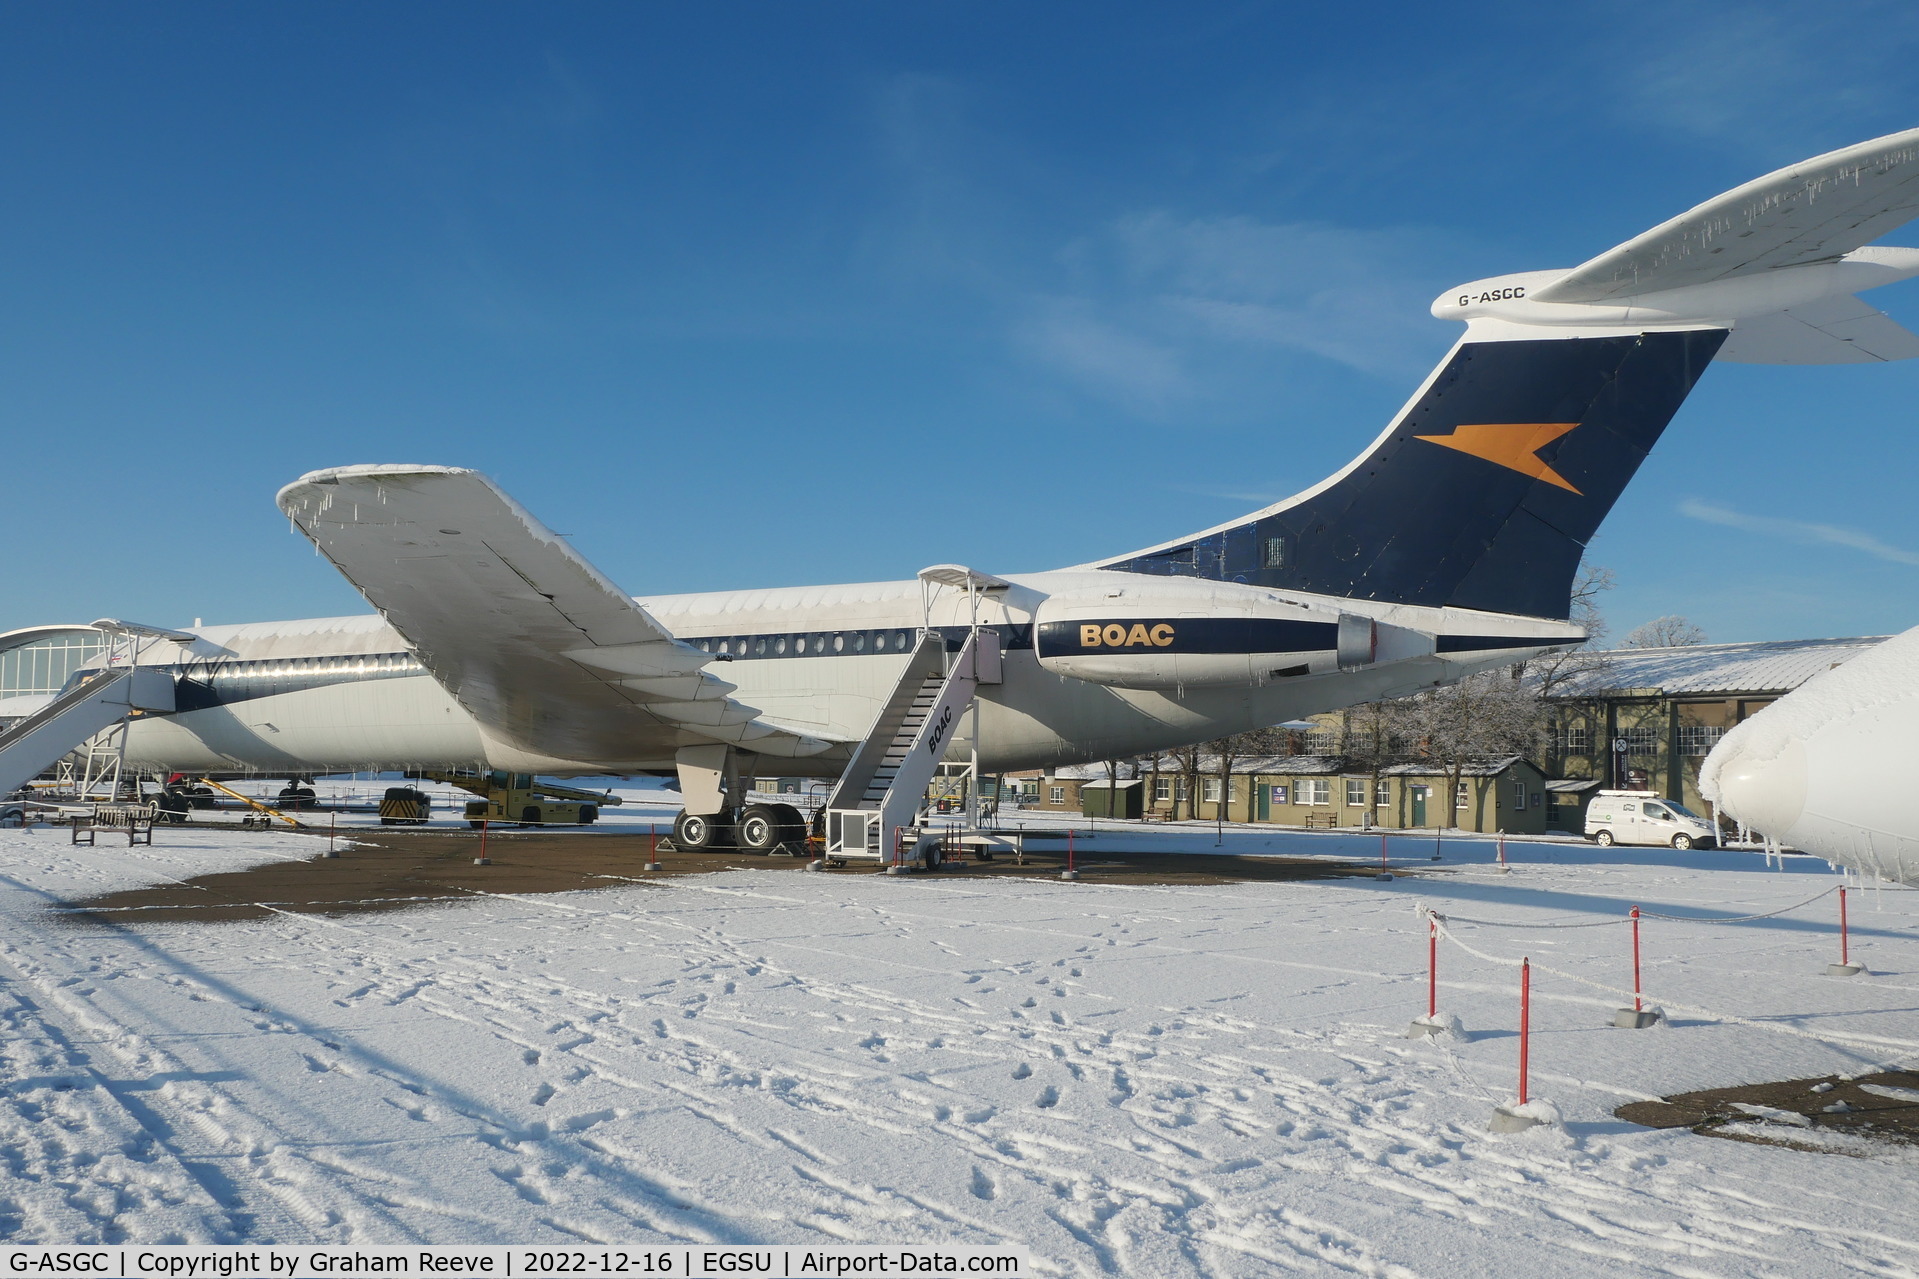 G-ASGC, 1965 BAC Super VC10 Srs 1151 C/N 853, On display in the snow at Duxford.